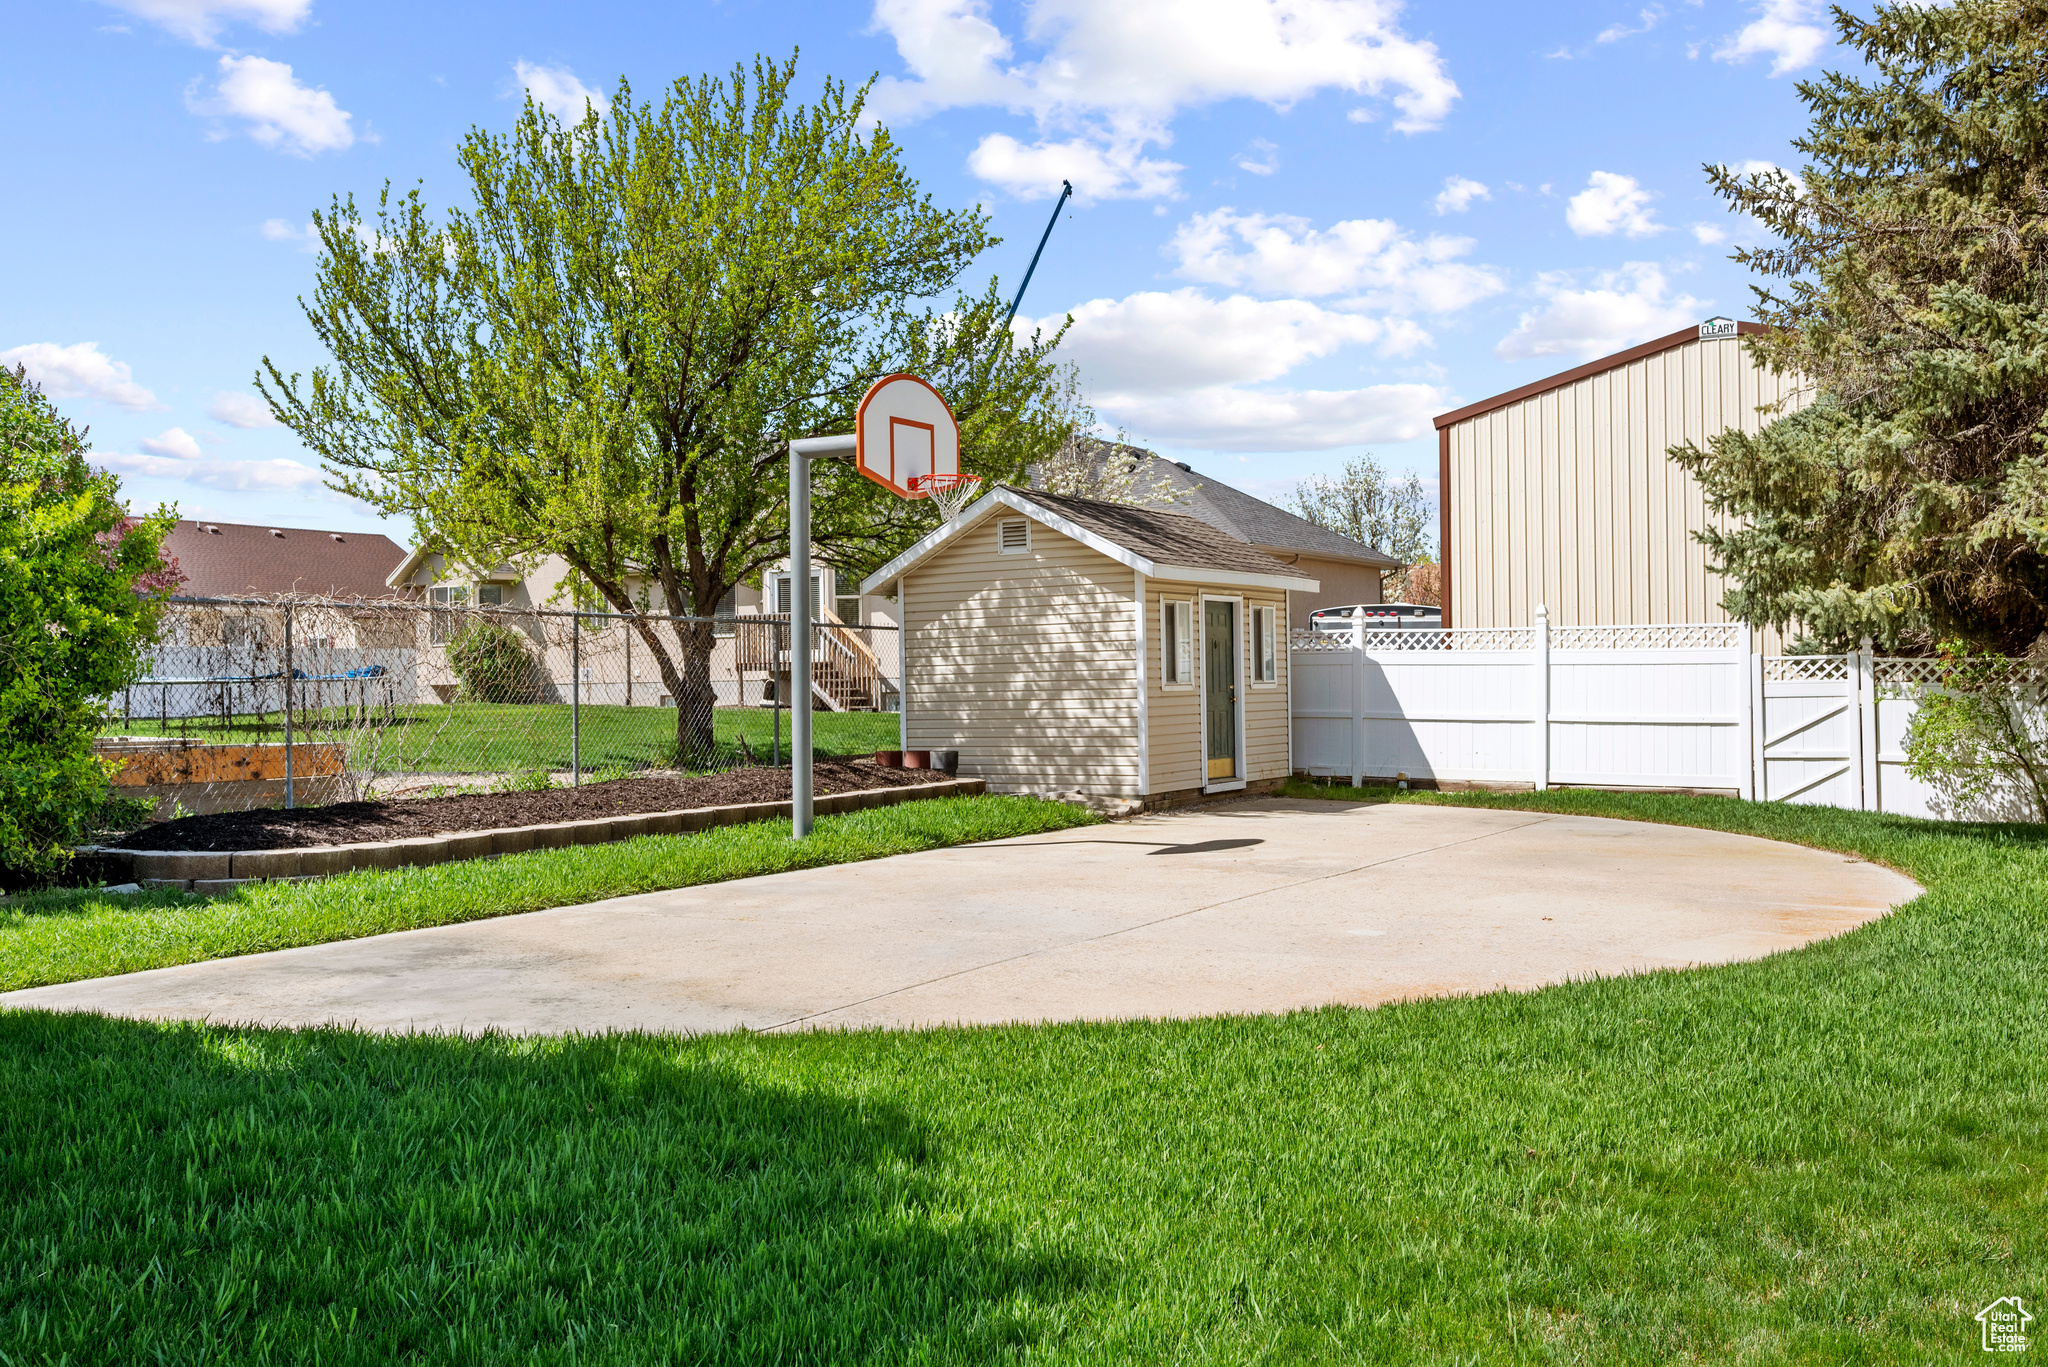 View of yard with basketball court and storage shed